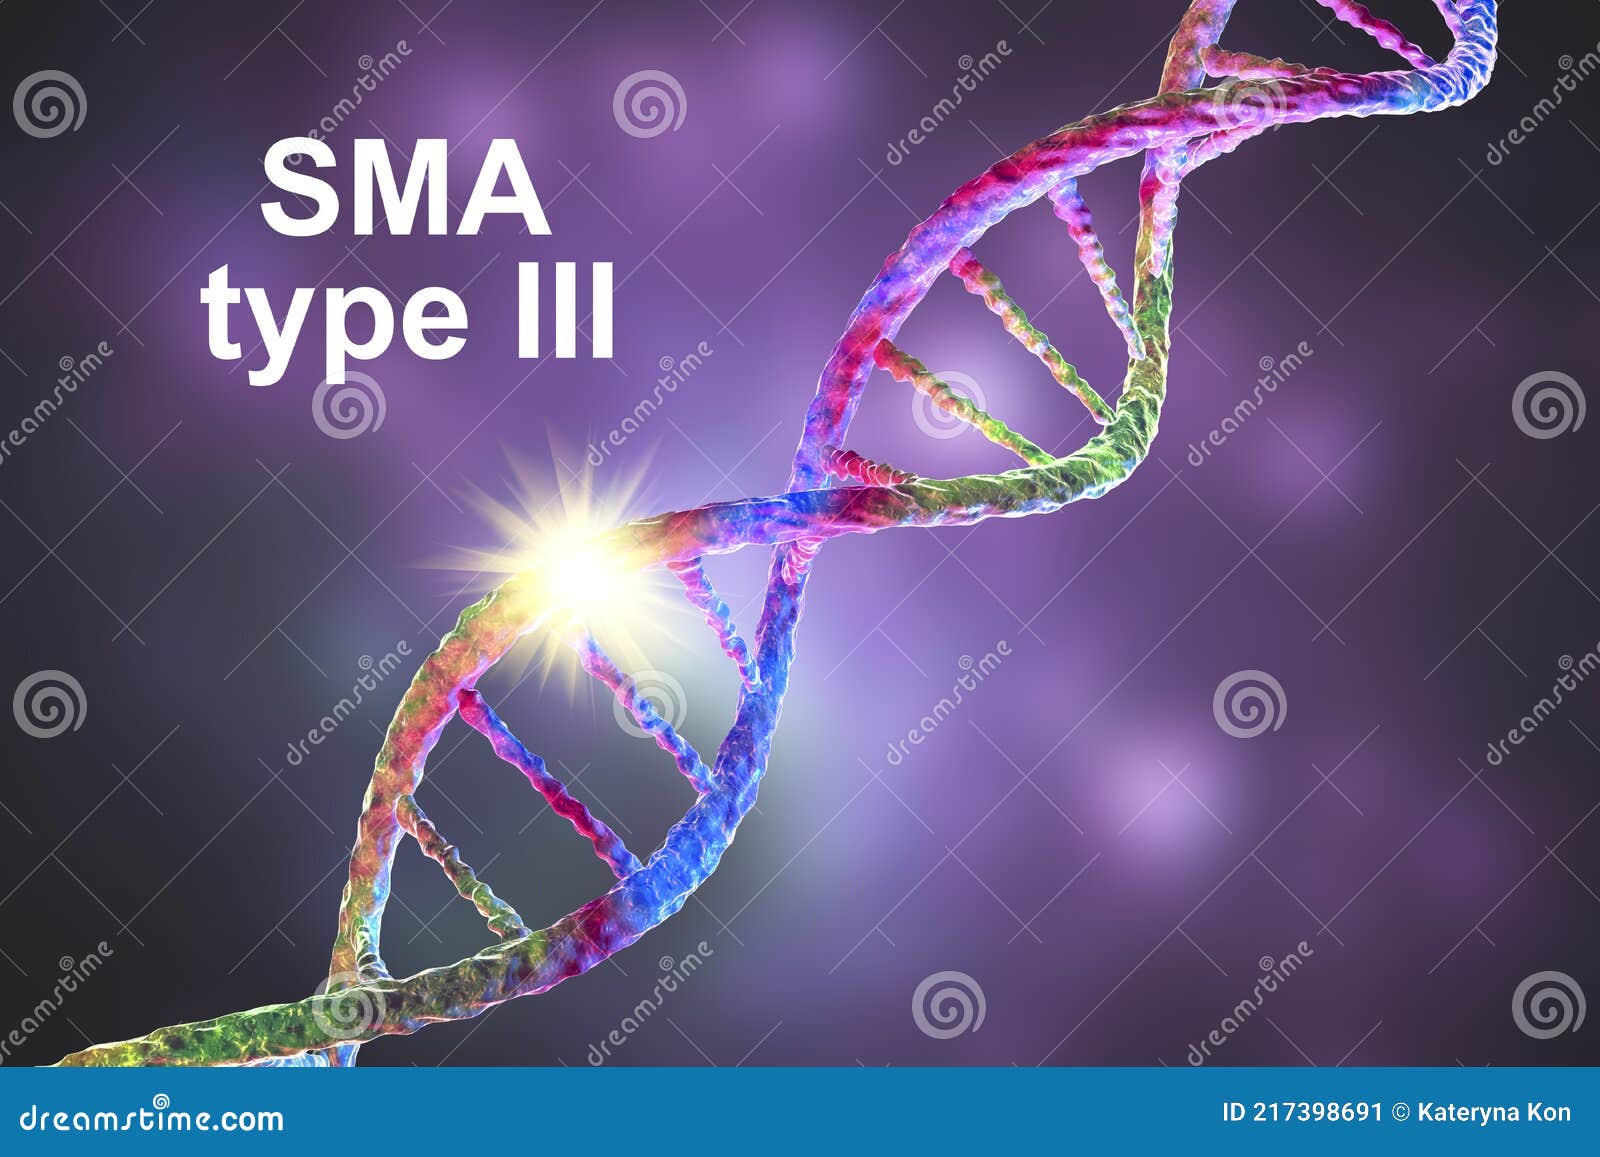 spinal muscular atrophy, sma, a genetic neuromuscular disorder